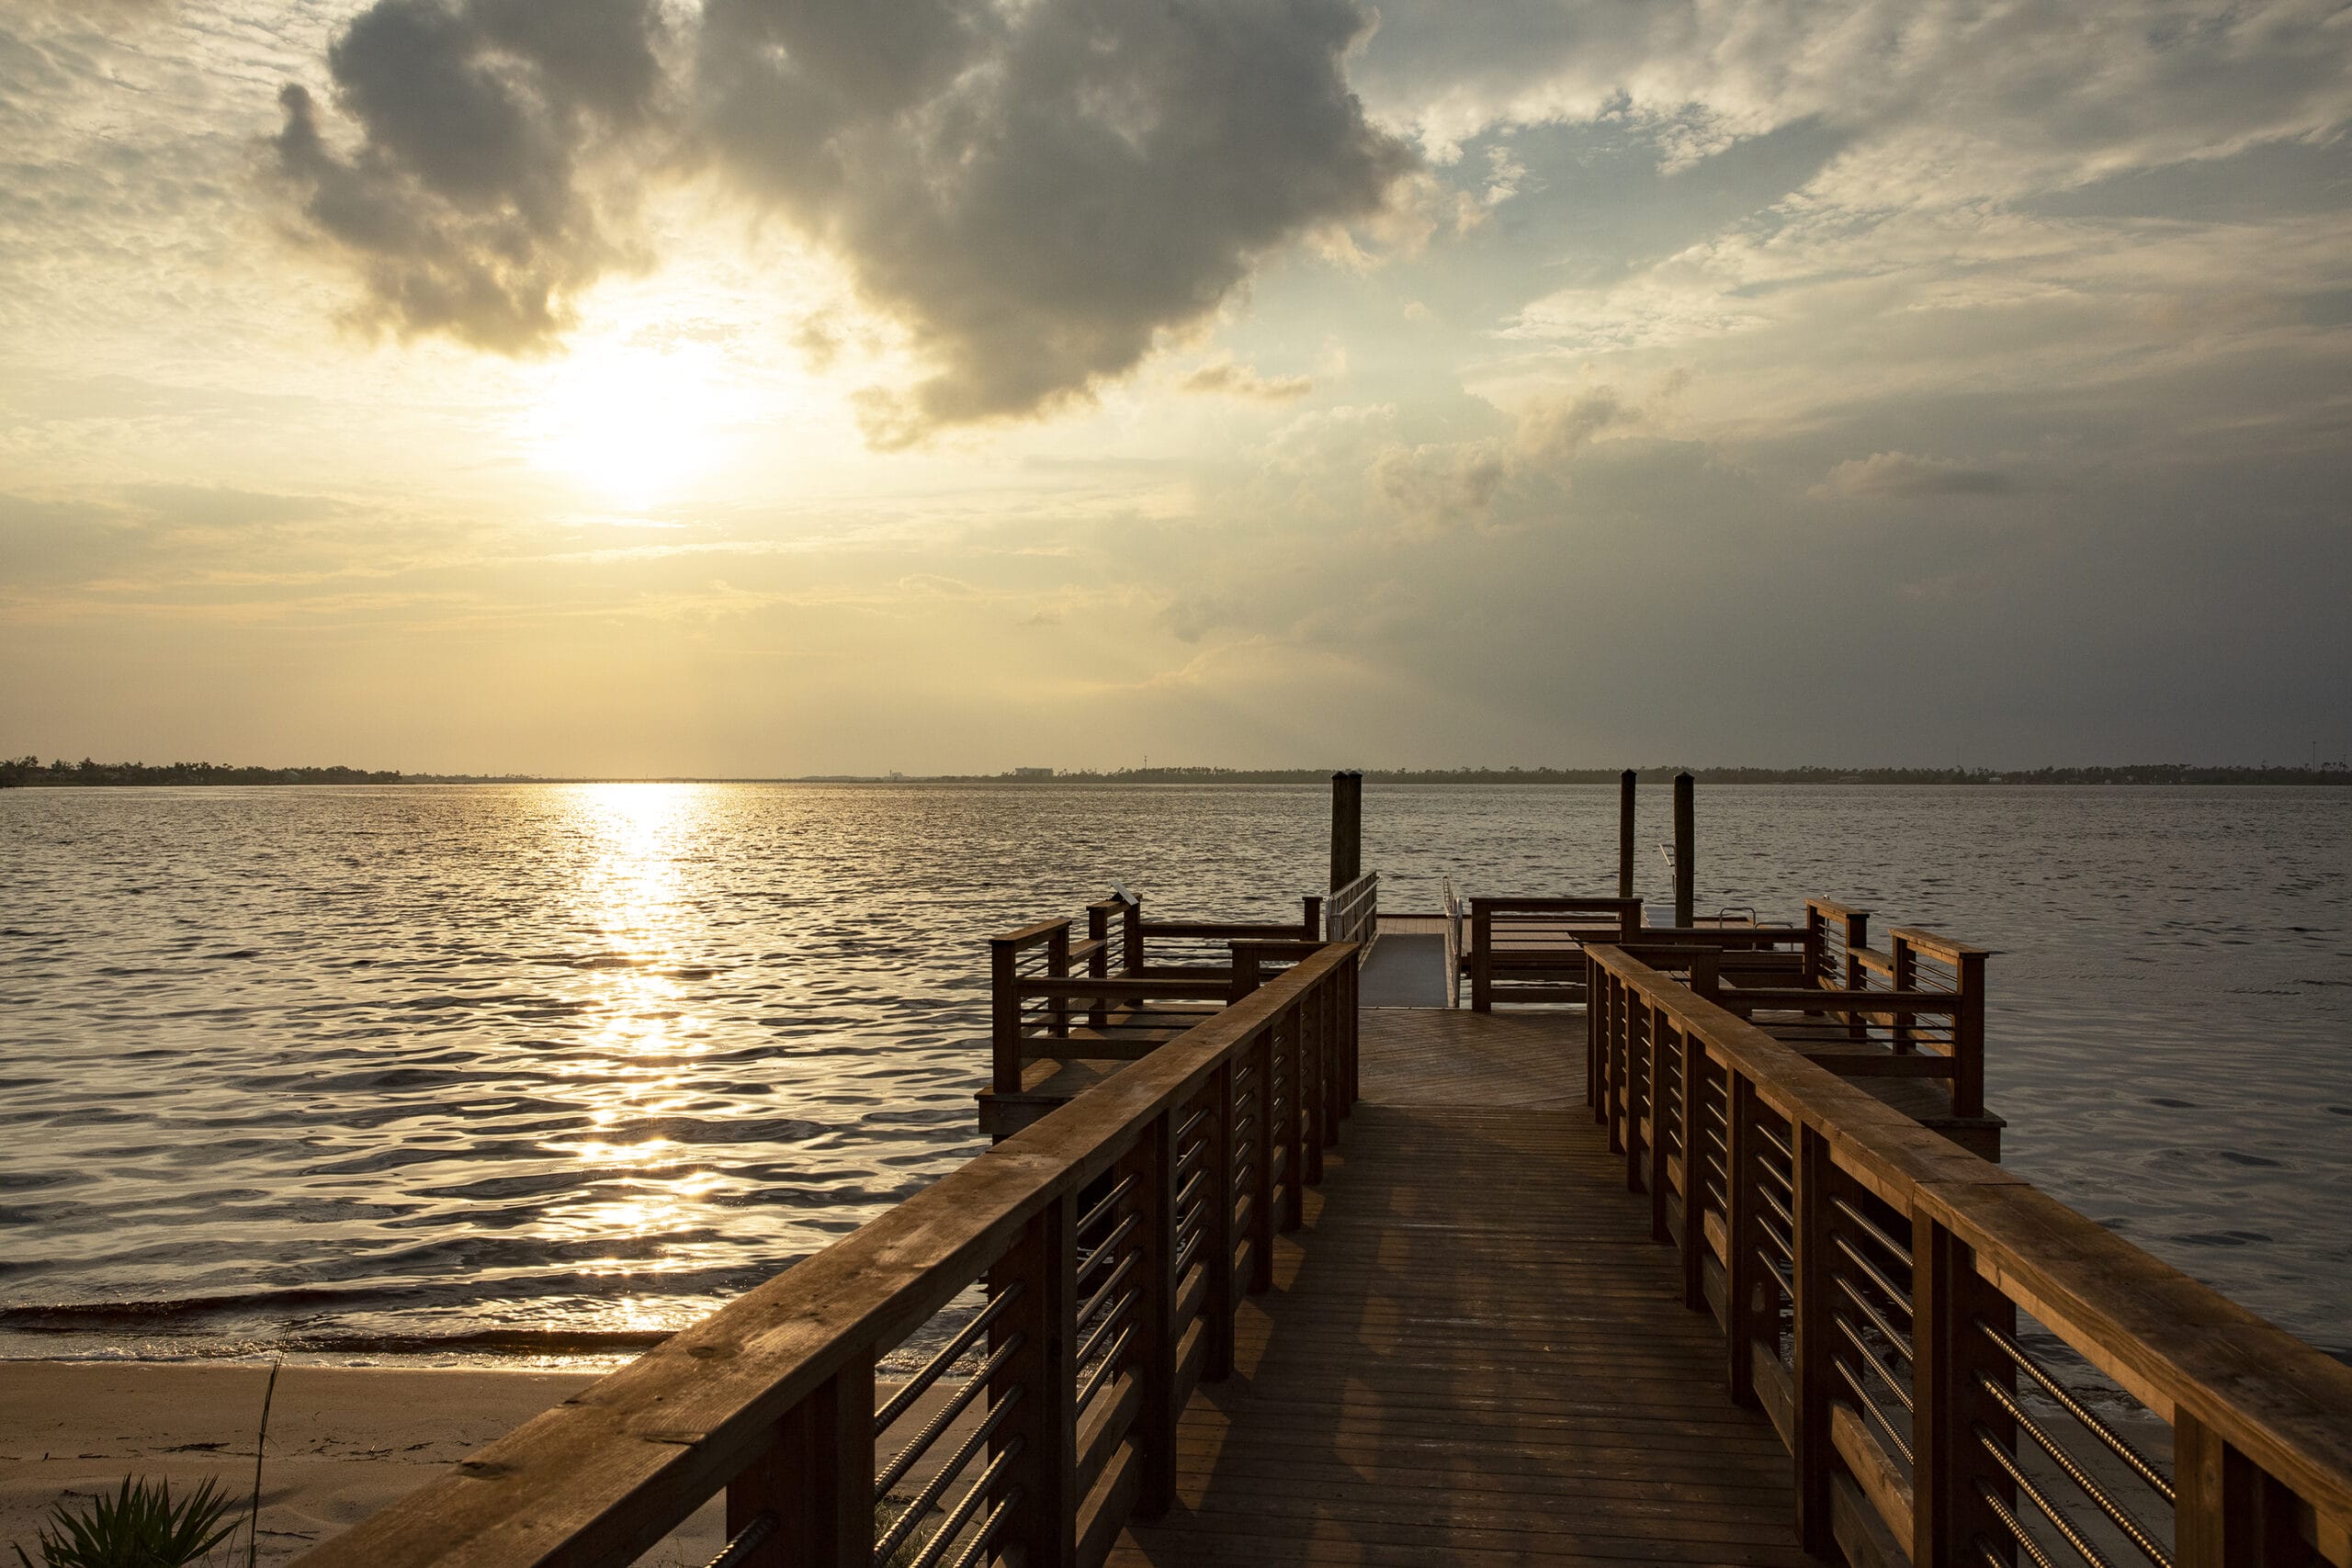 A dock leading to a body of water at sunset.